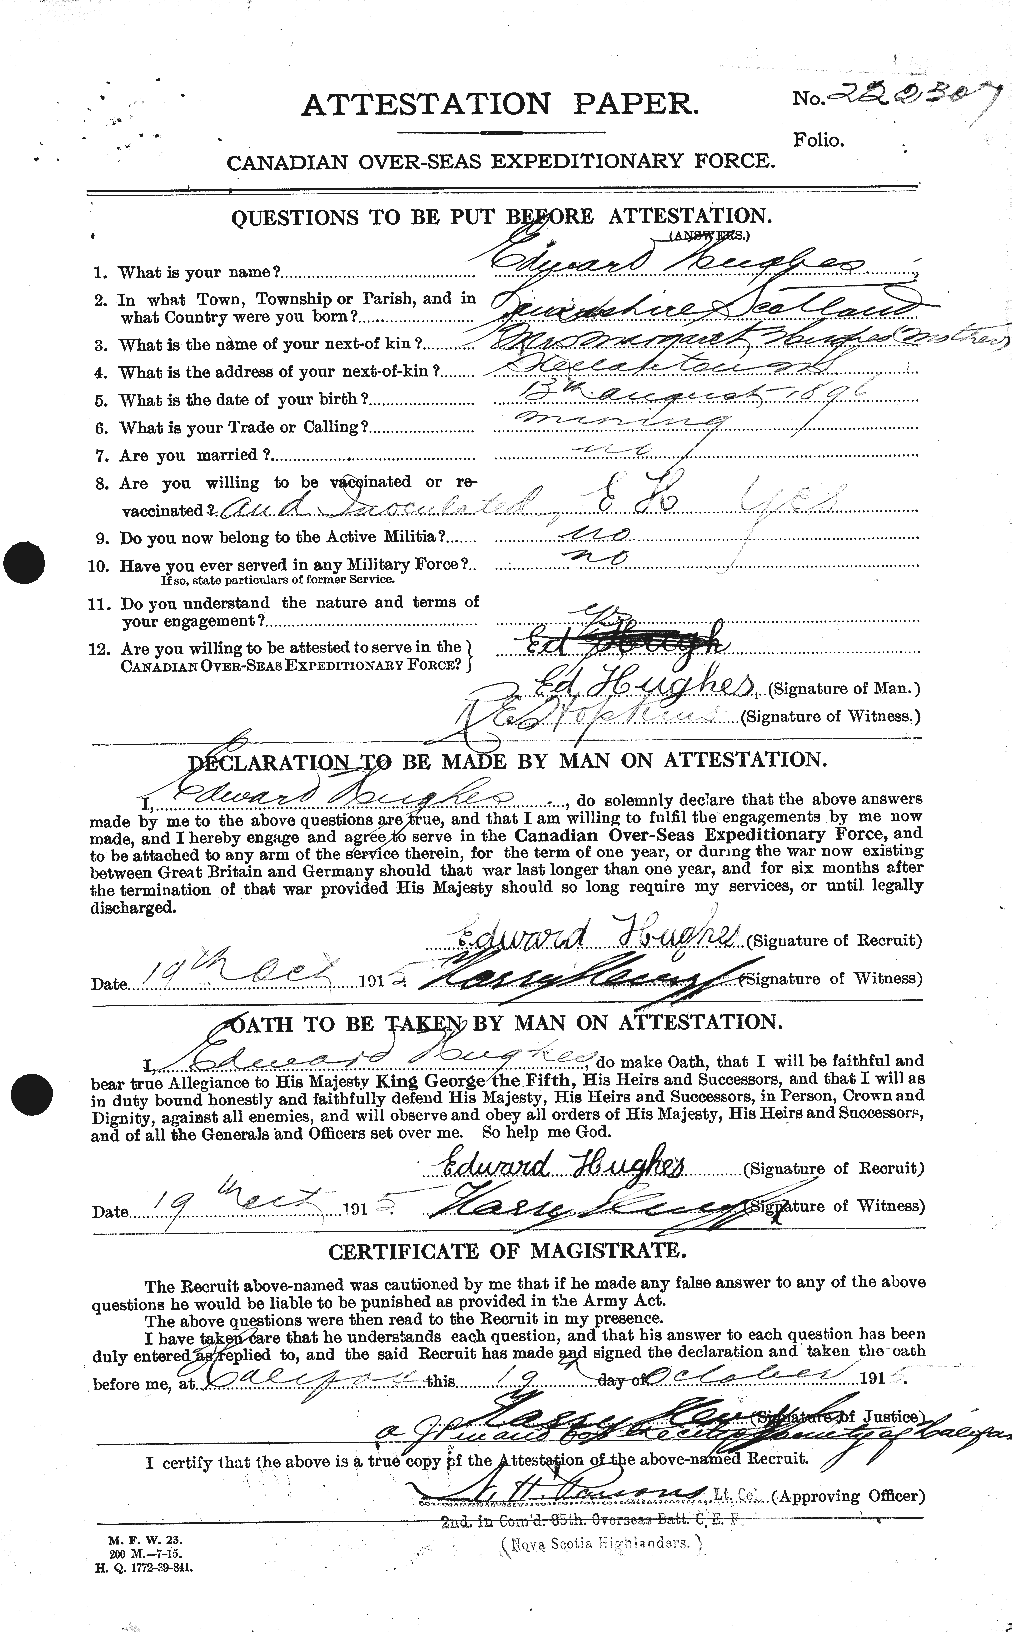 Personnel Records of the First World War - CEF 402679a